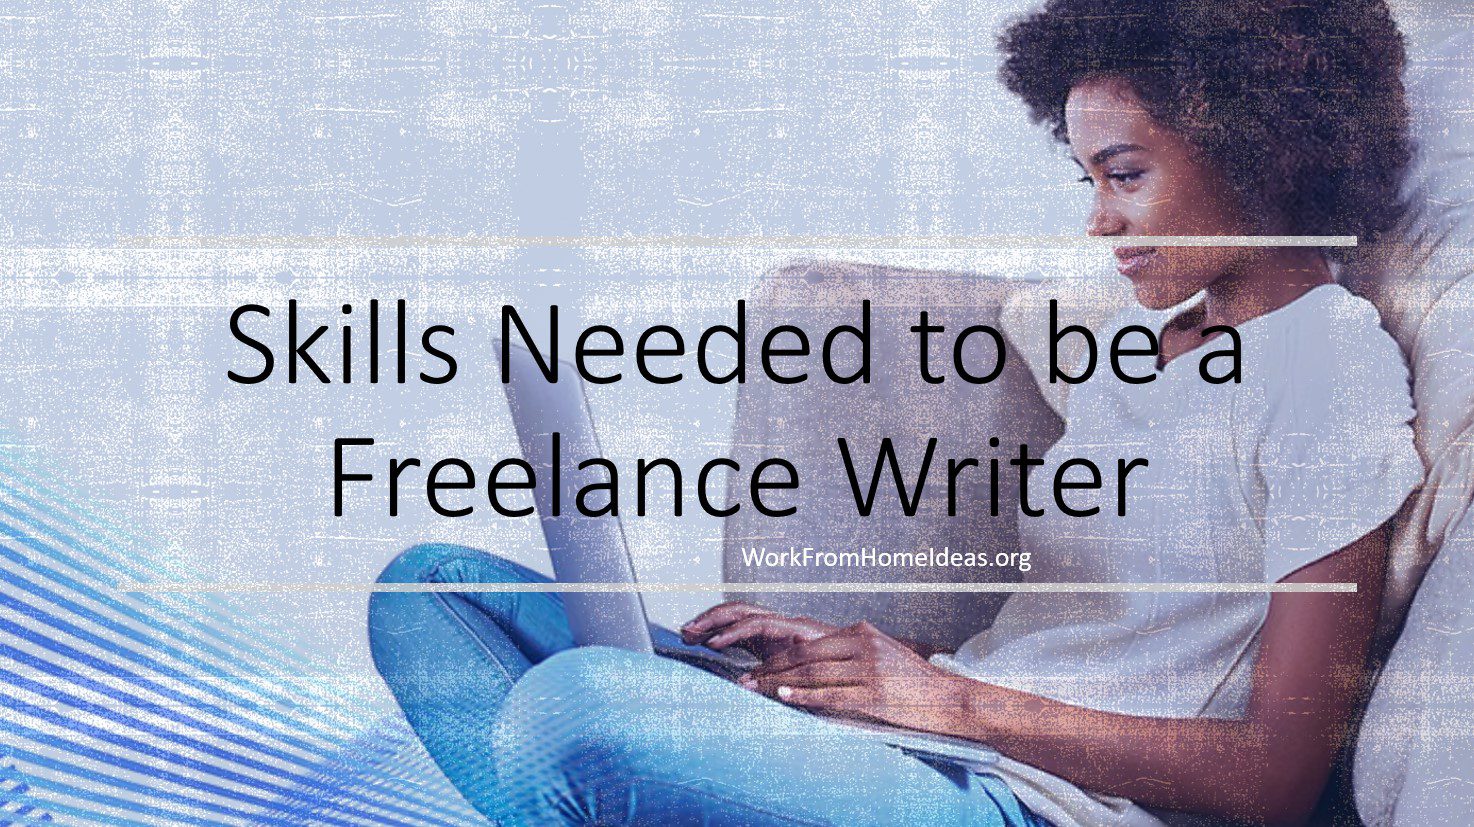 Skills Needed to be a Freelance Writer